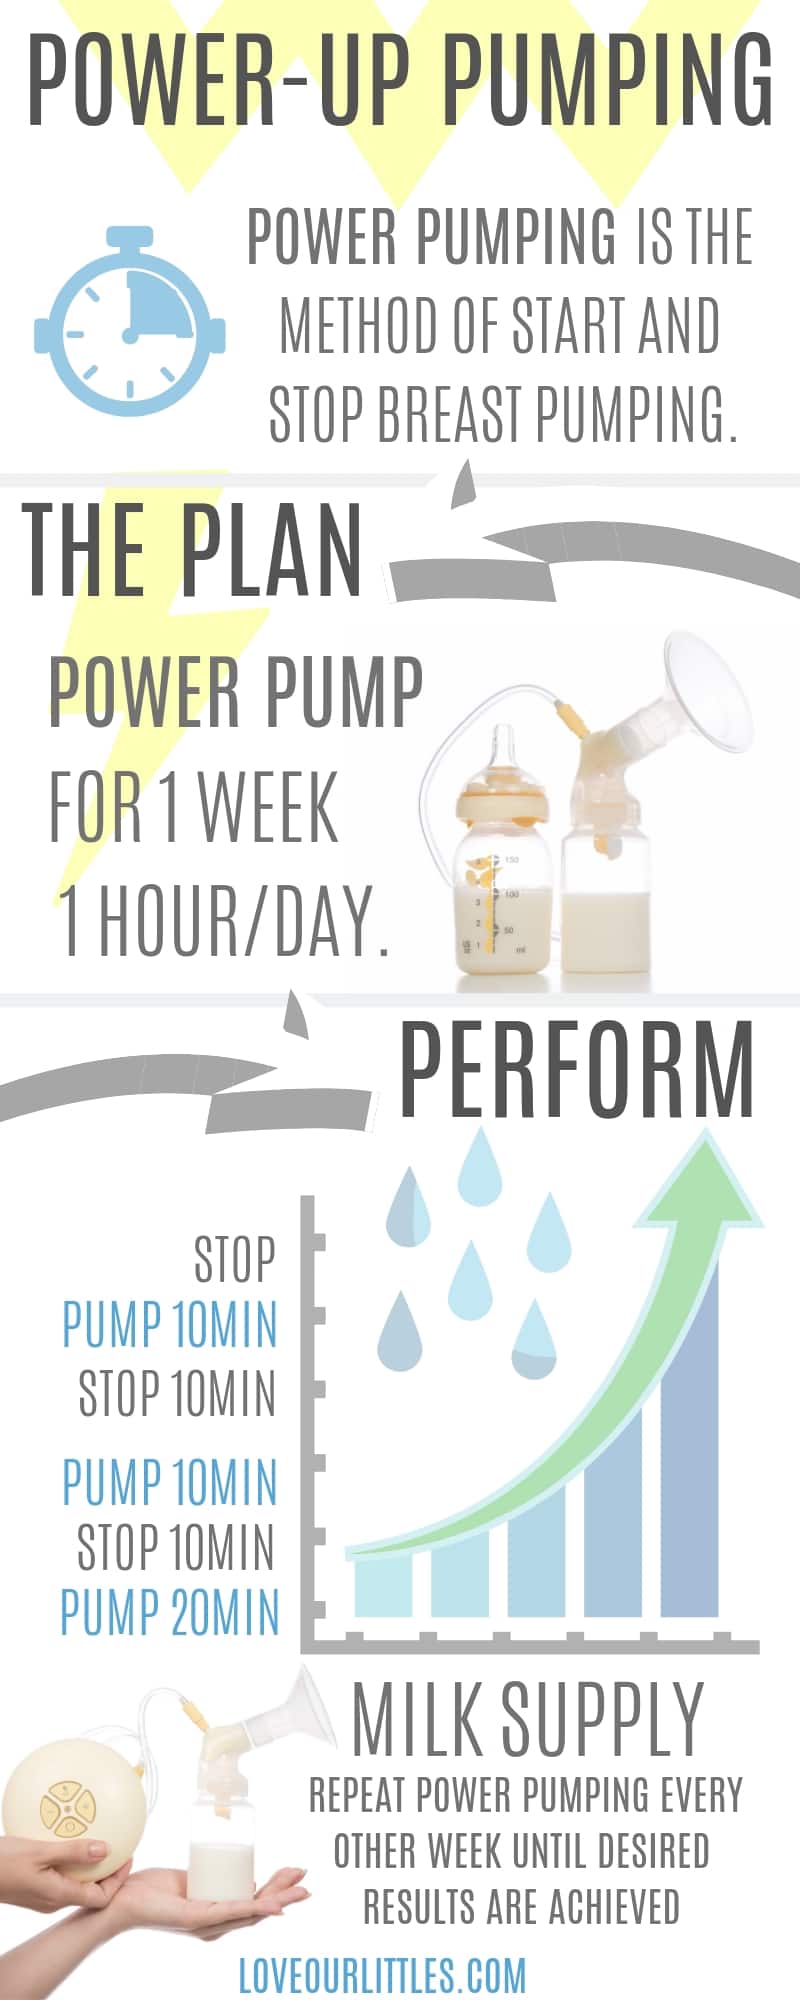 Power-Up breast pumping infographic to demonstrate power pumping and how to fix uneven milk supply in one breast.